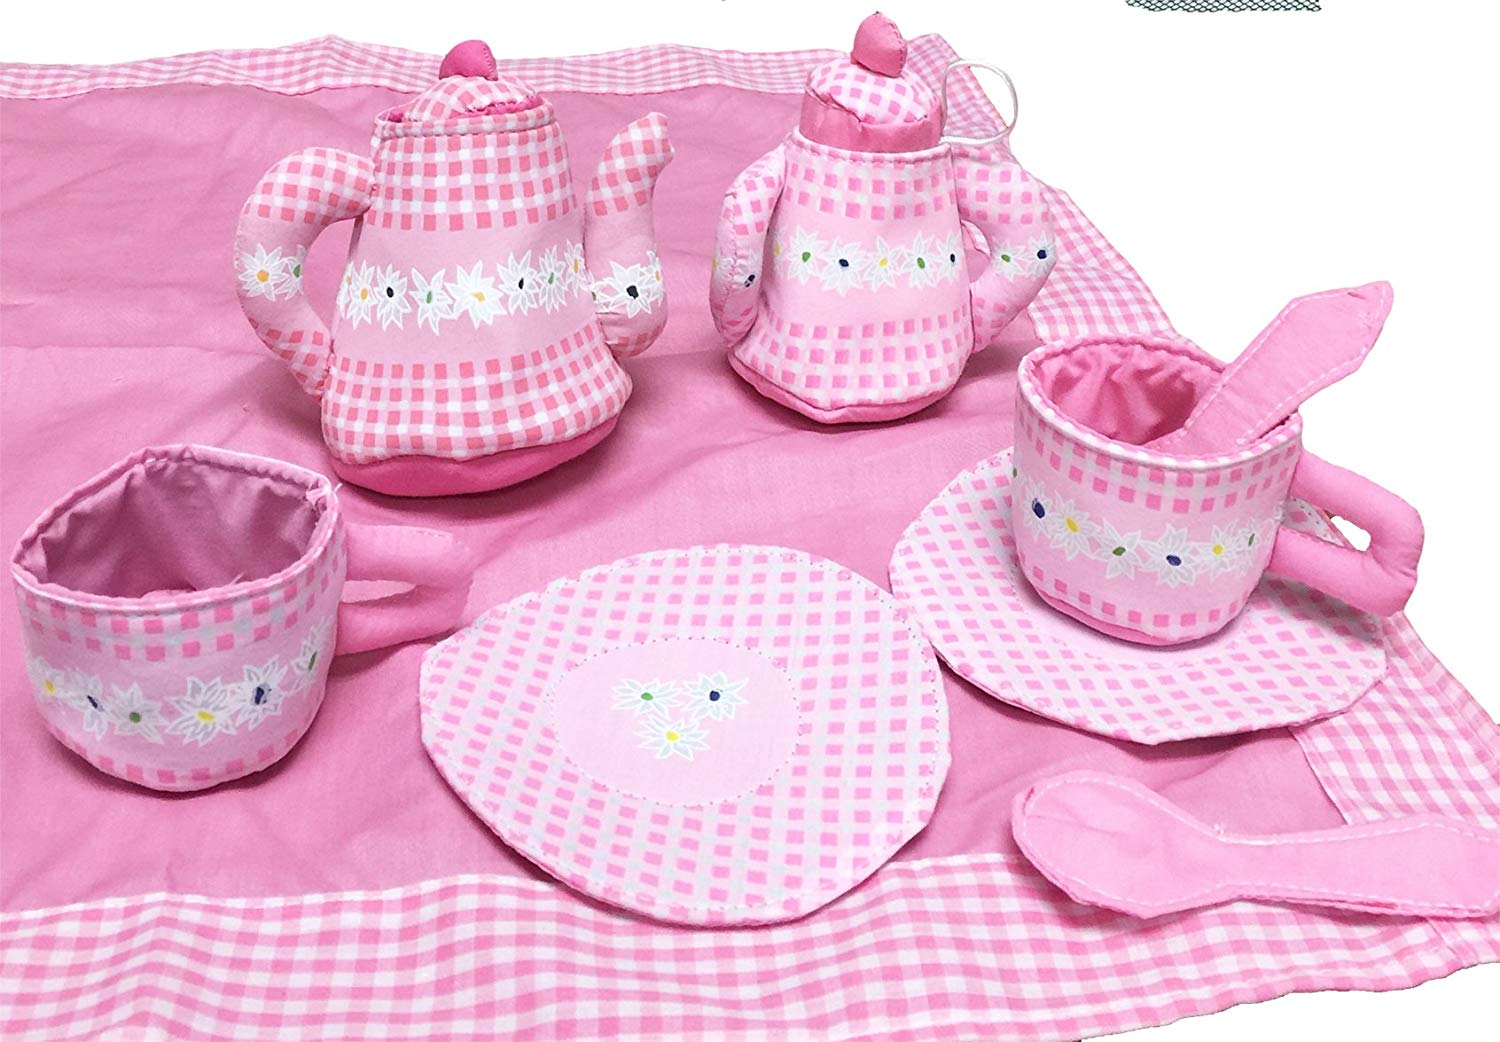 Tea Party Set by Pockets of Learning! 